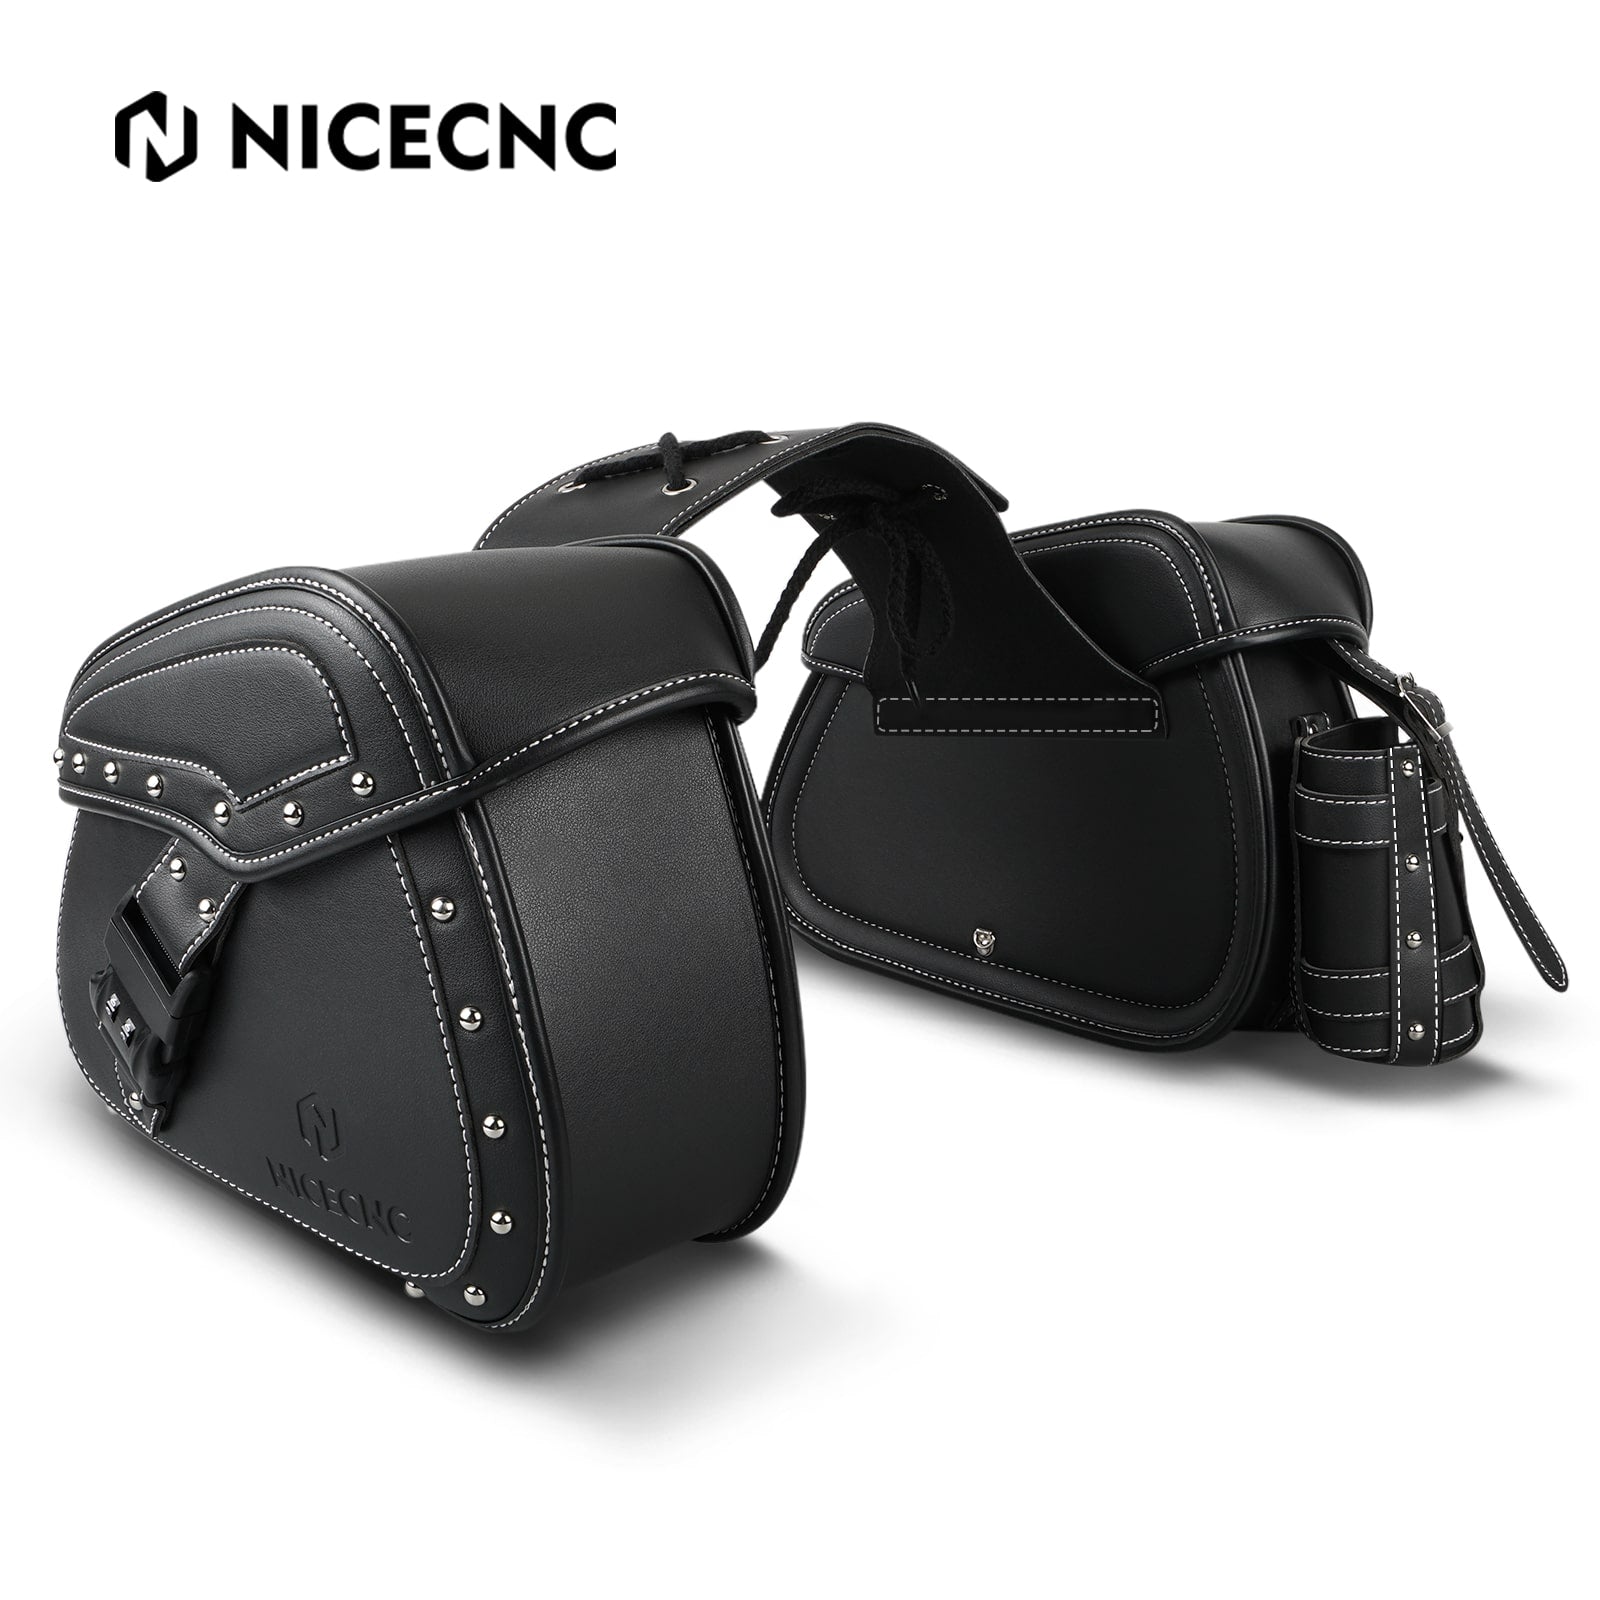 PU leather Motorcycle Saddle Bags with Cup Holder & Lock for Universal Motorcycle